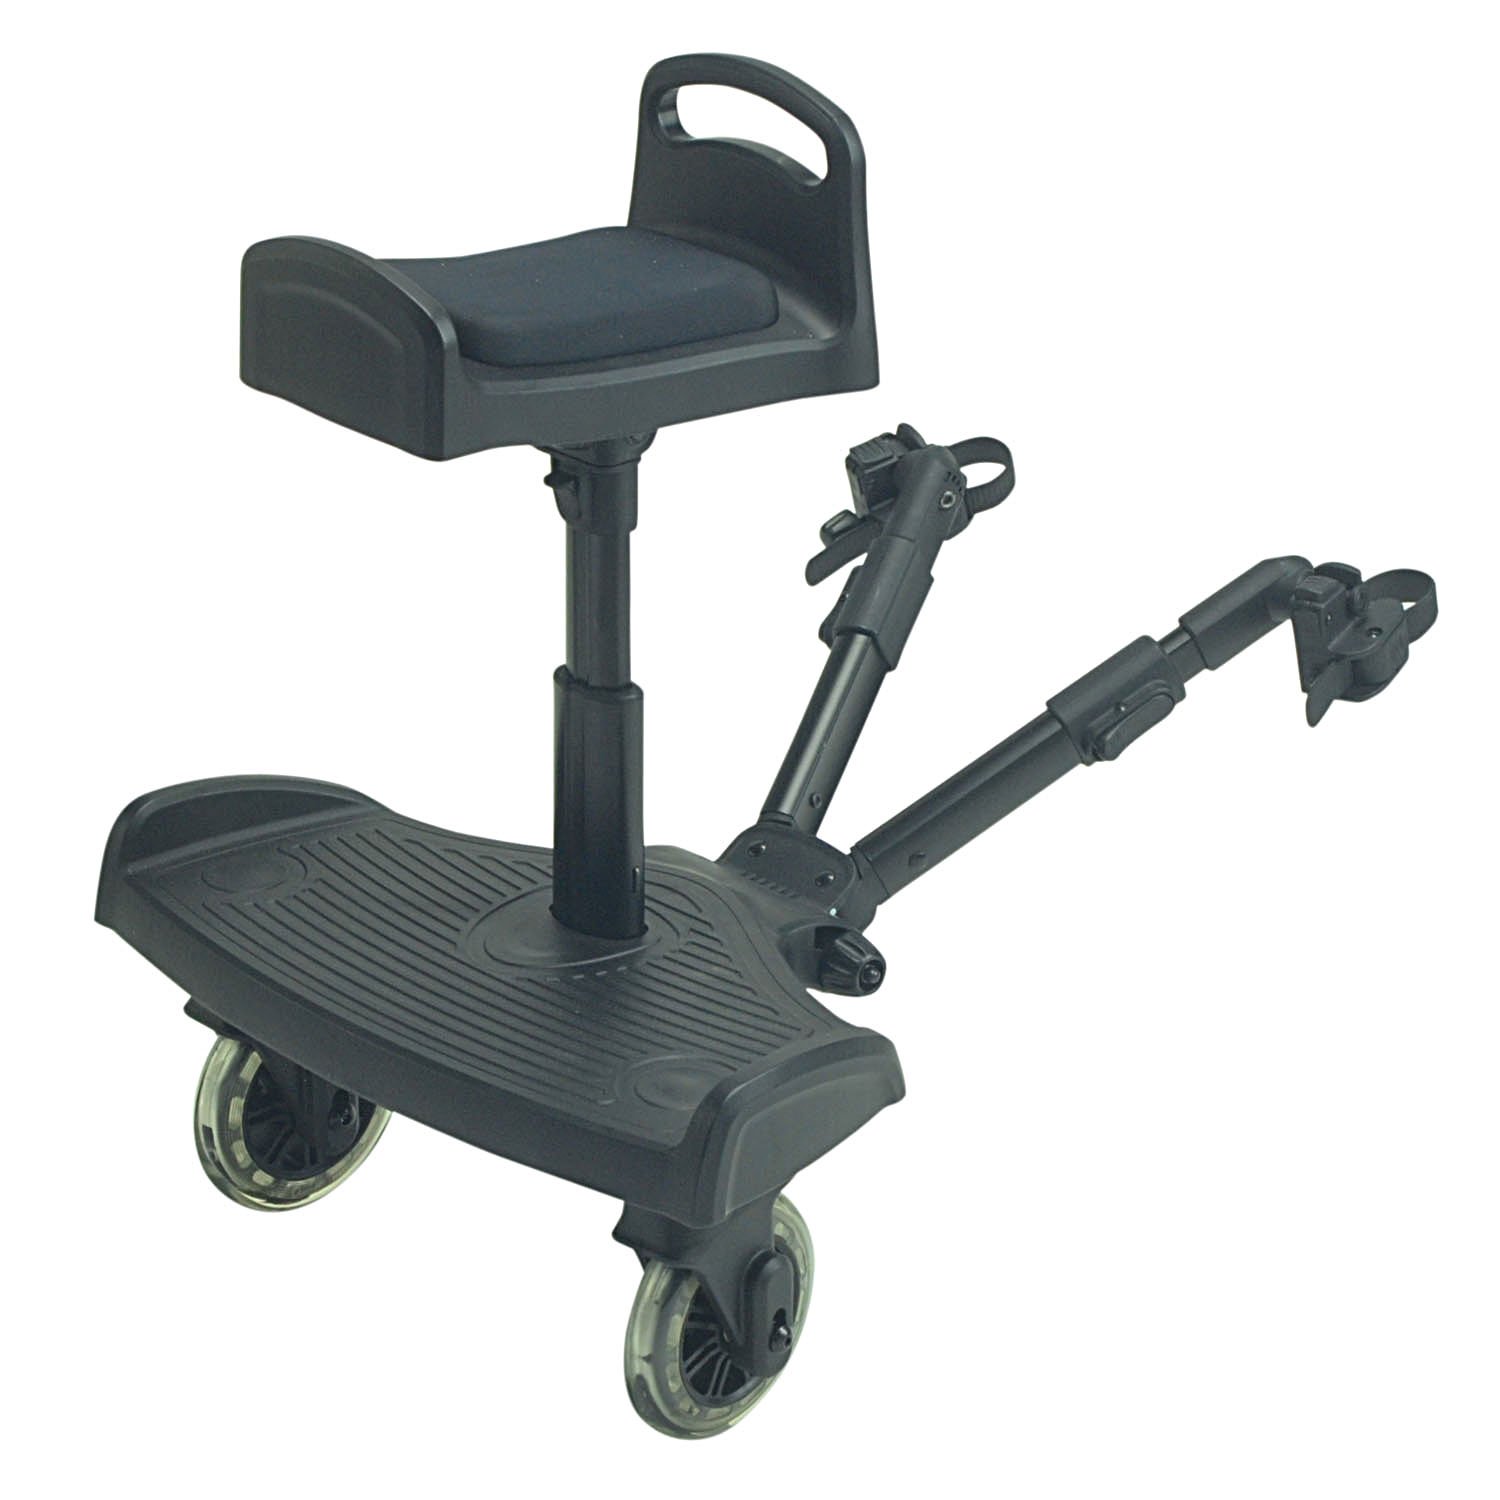 For-Your-Little-Ride On Board Compatible Travel Systems, Brevi B Super